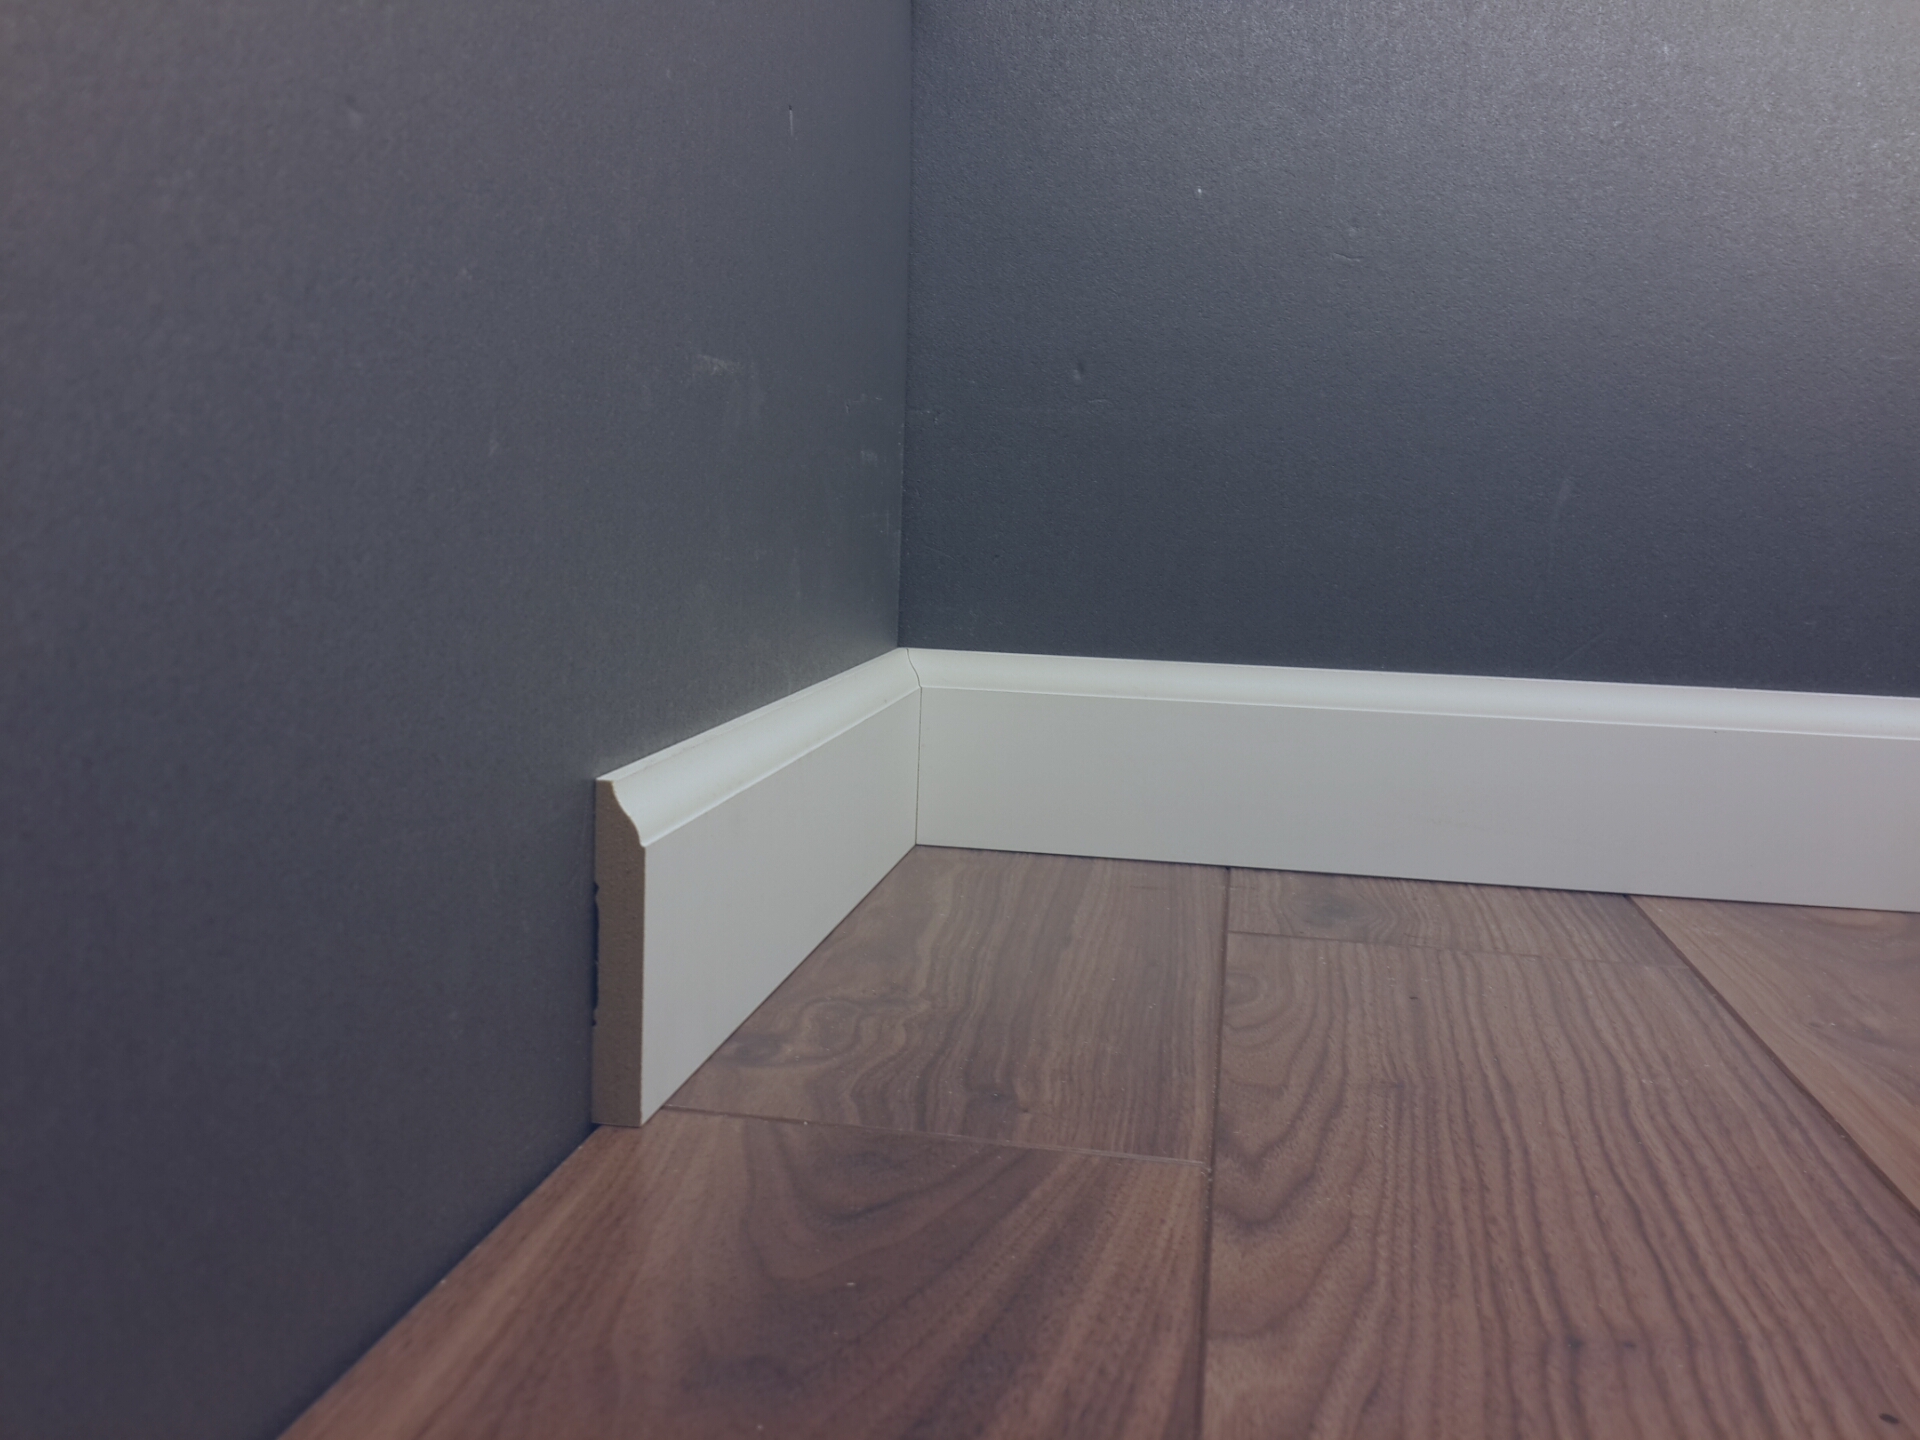 bright skirting board made of wood in the interior of the room